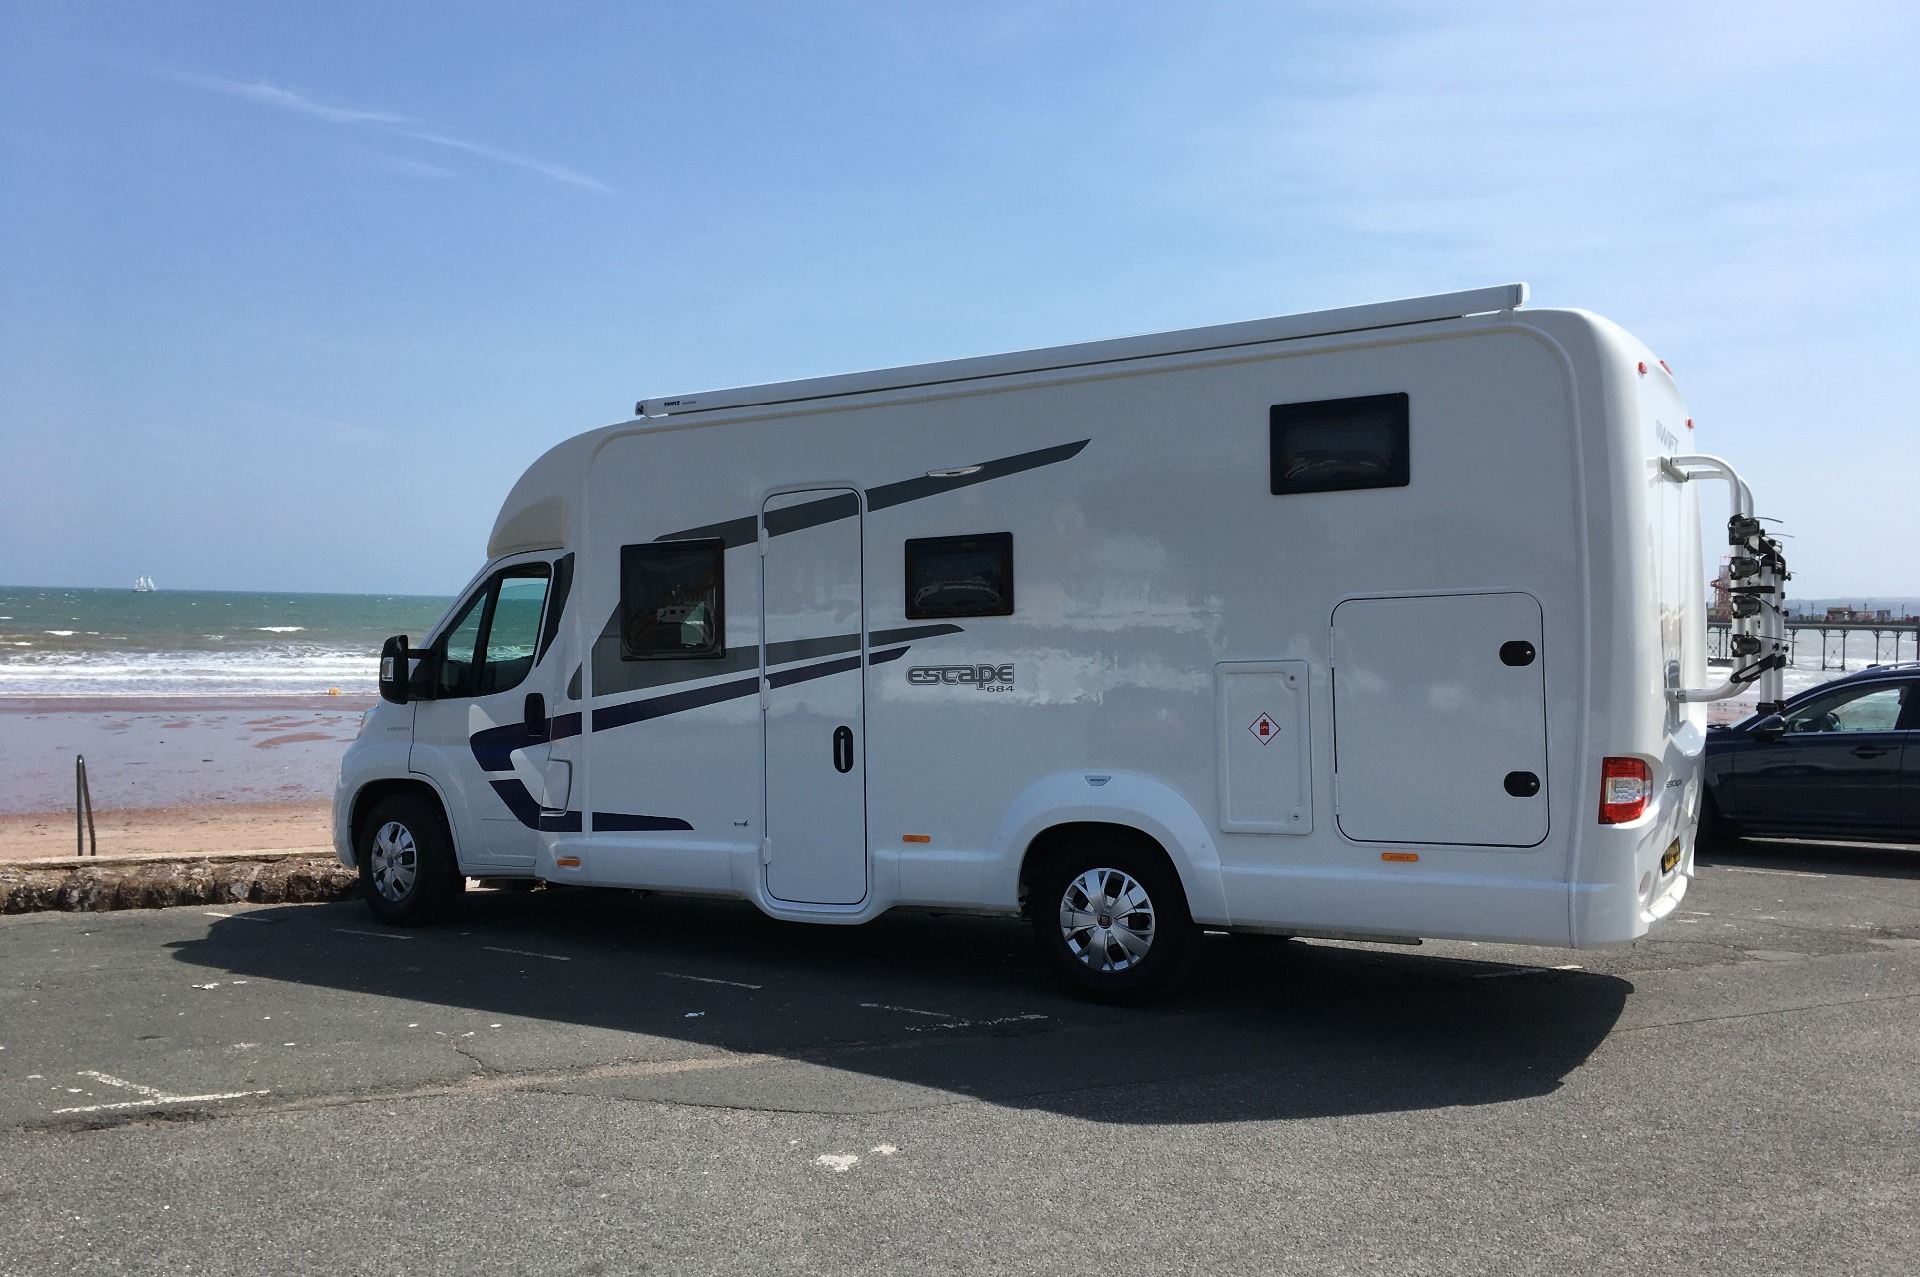 Family motorhome hire with fixed twin or double bed